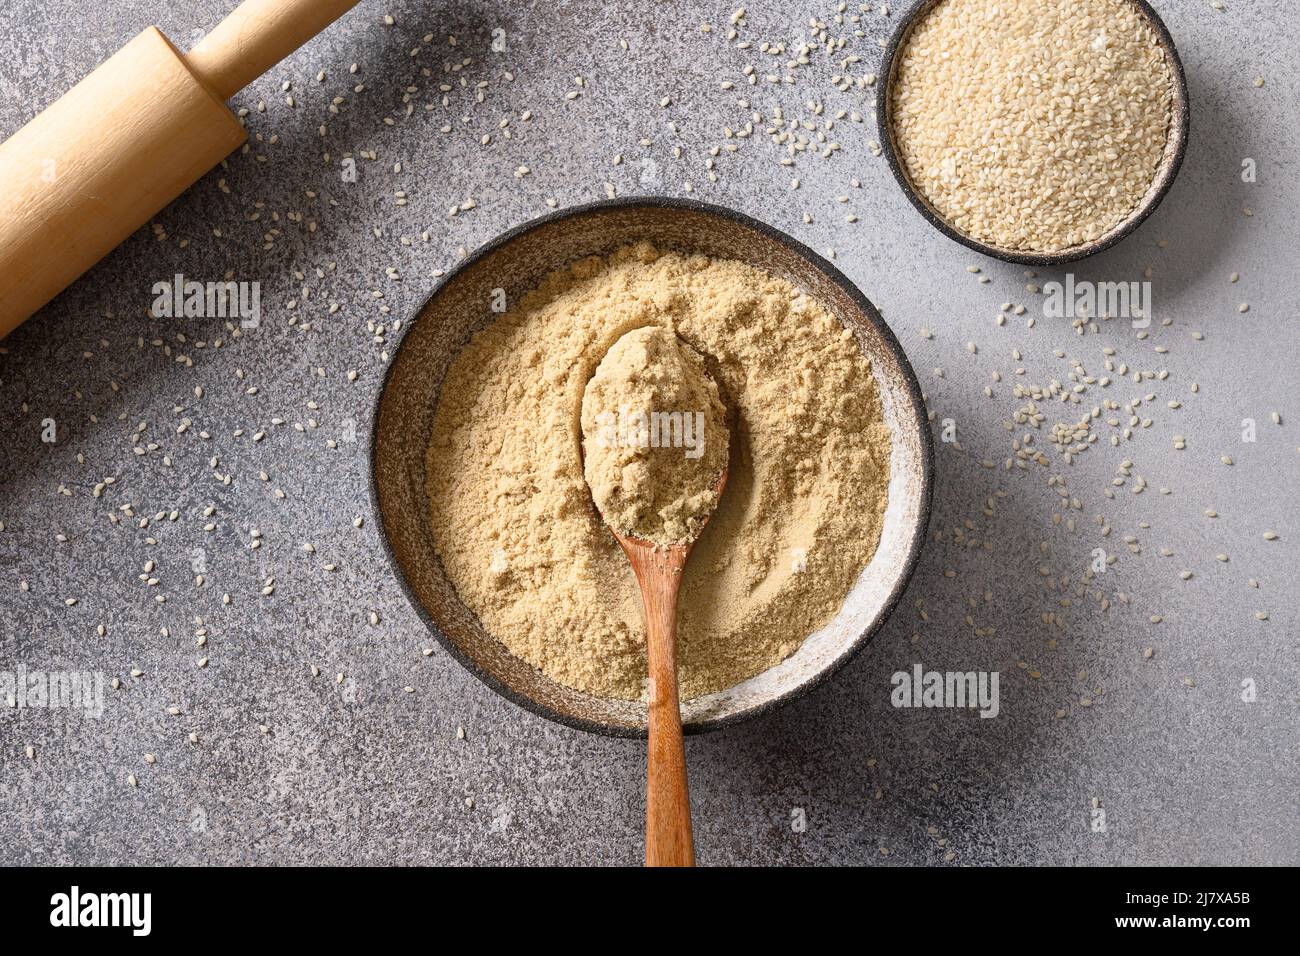 Sesame flour in bowl and white sesame seeds on gray background for cooking gluten free dessert. View from above. Good source of protein, minerals, nat Stock Photo